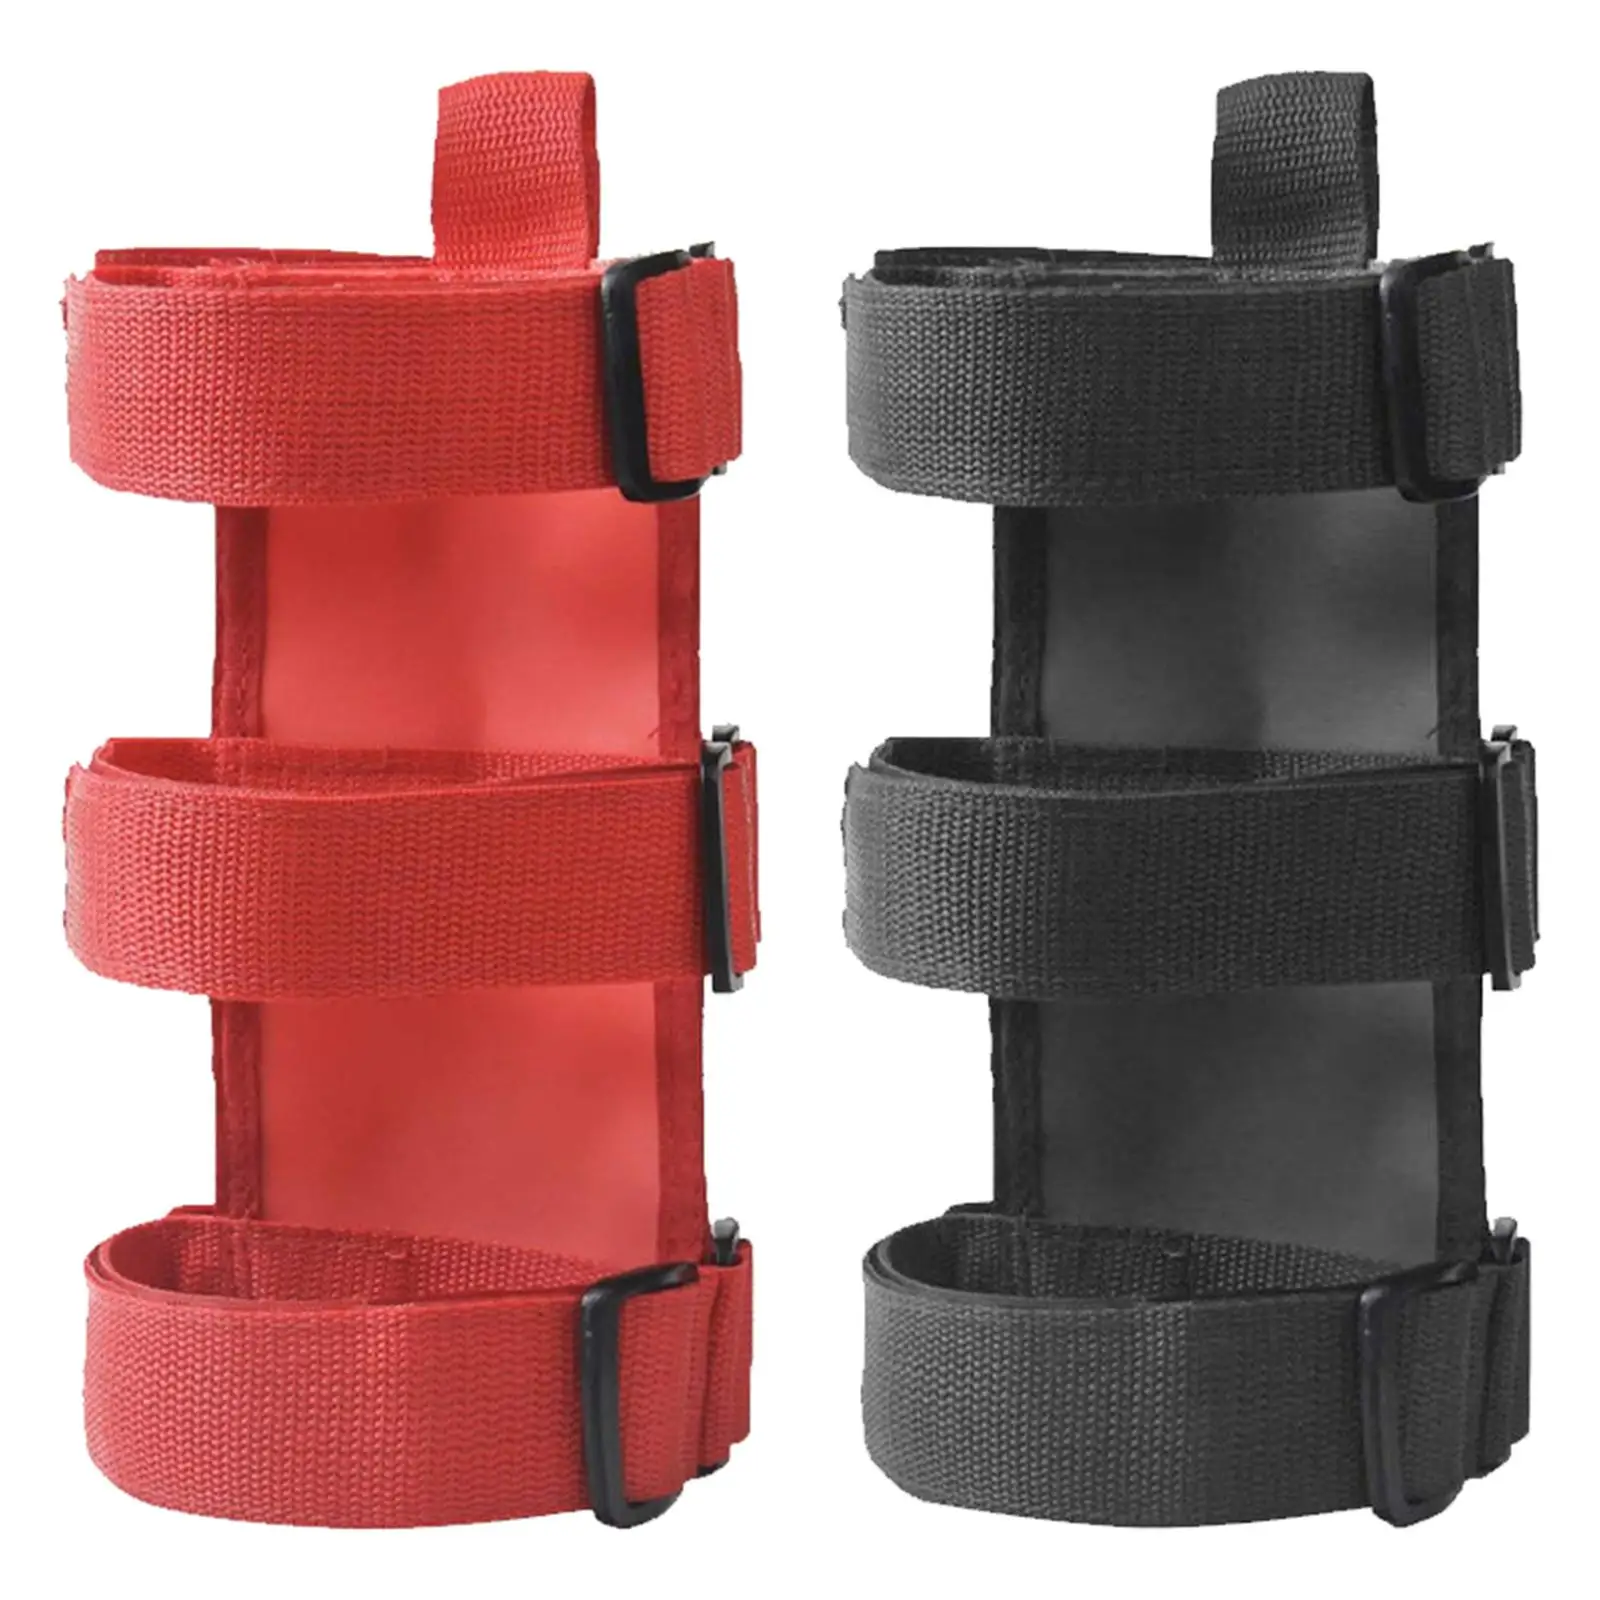 Auto Cars Fire Extinguisher Fixing Holder Bracket Belt Strap Fit For Automobile 